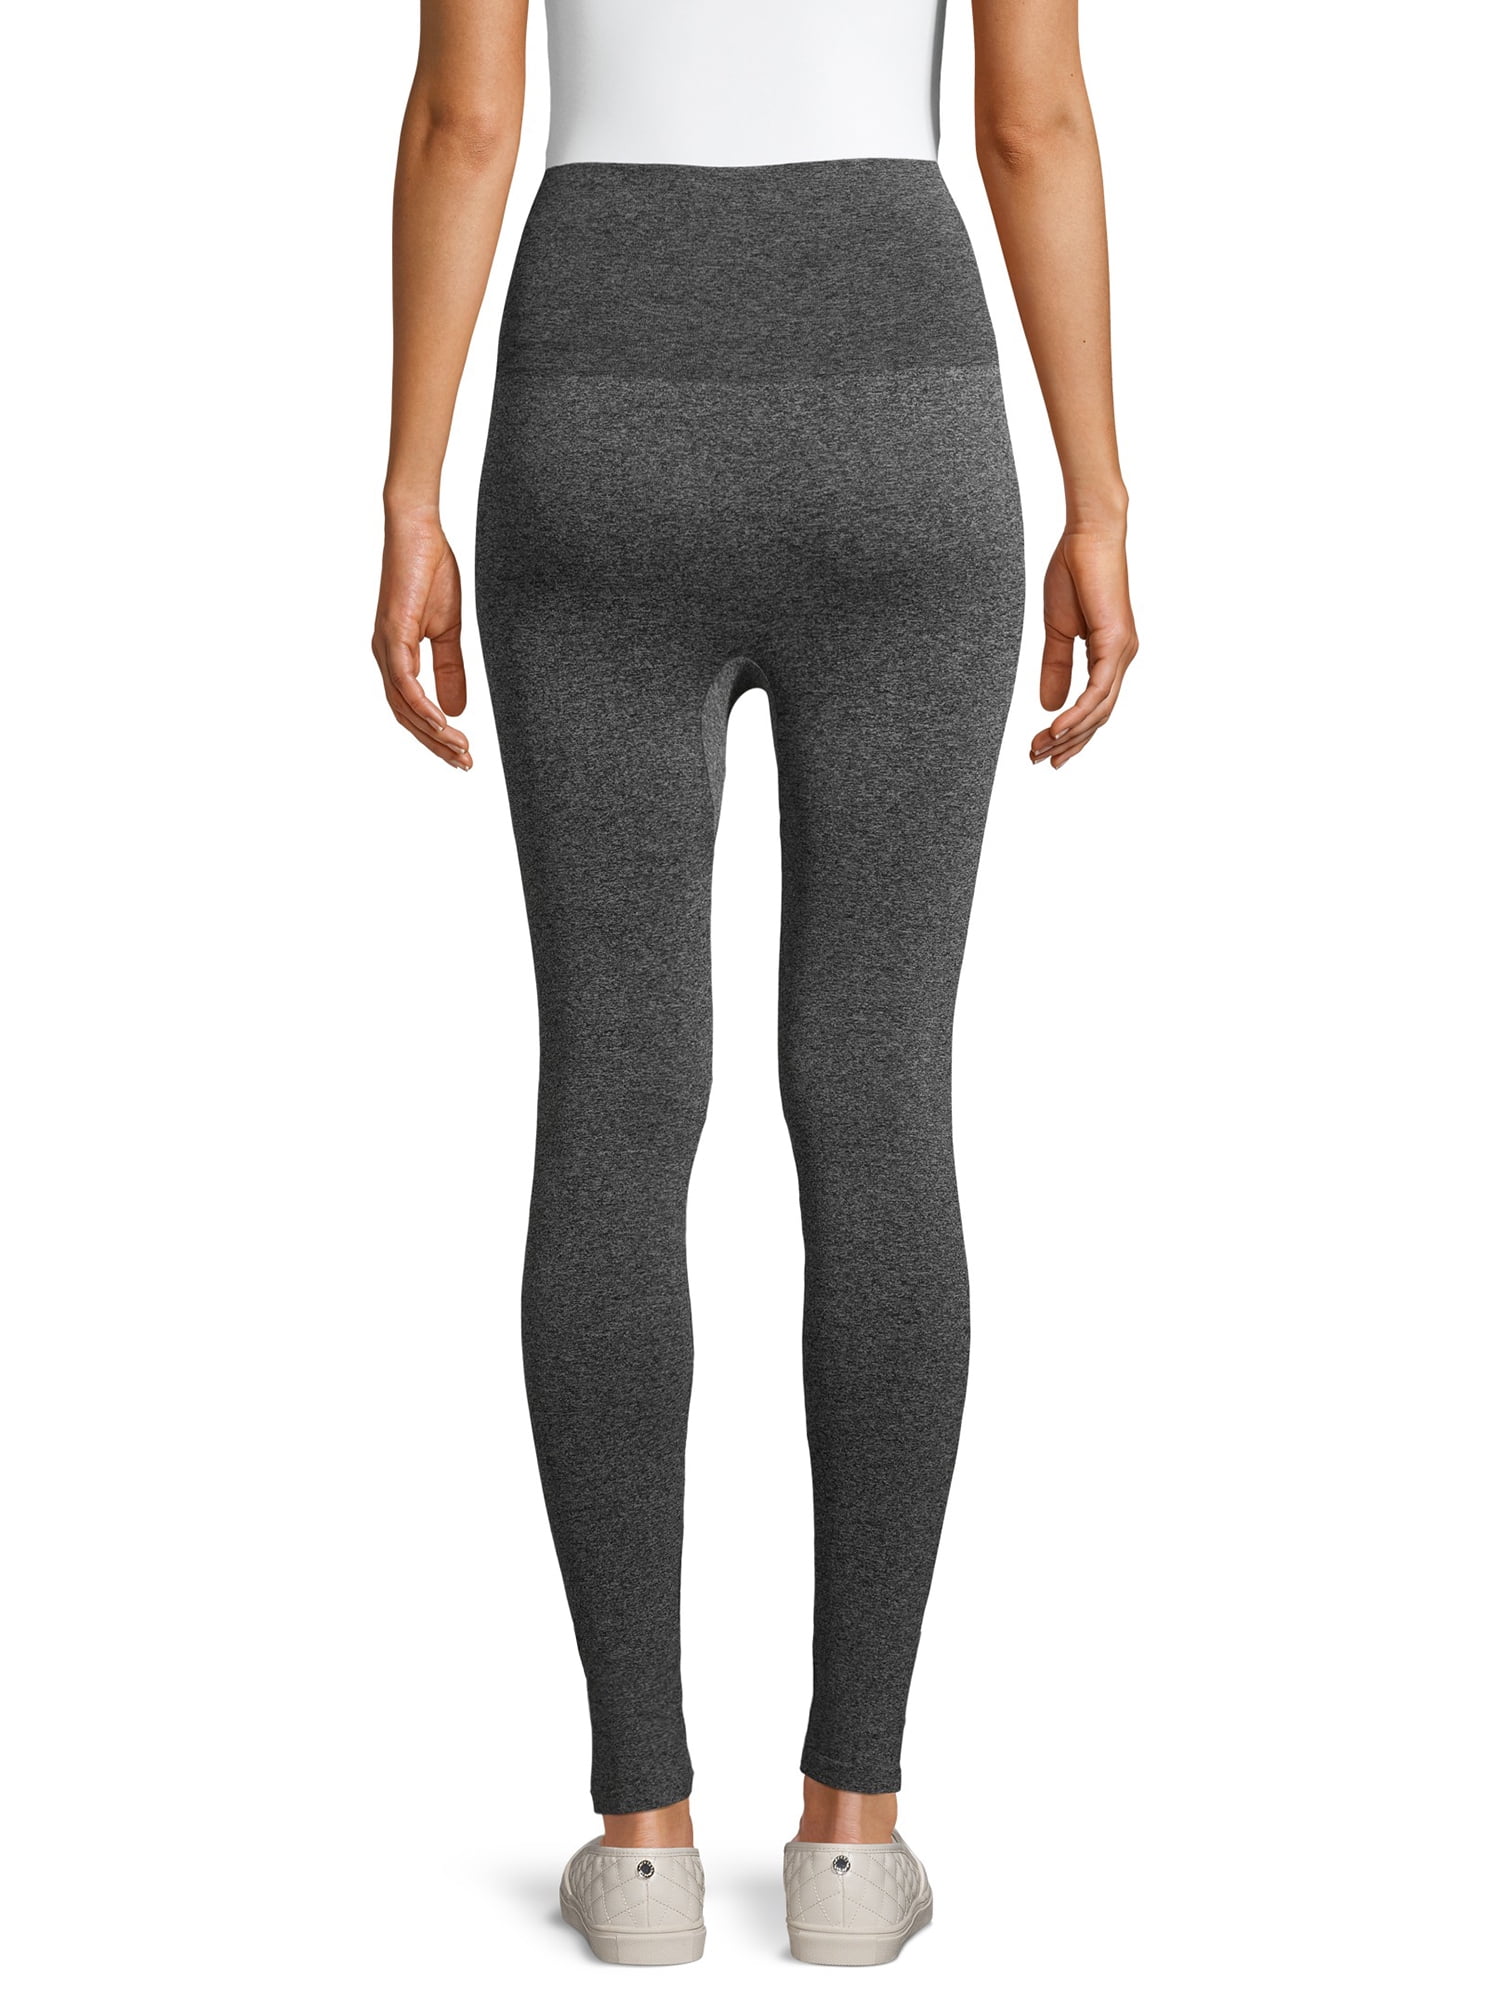 Warner's Women's No Muffin Top Leggings - Seamless, Shaping, High-Waisted  Control Leggings, Size X-Small, Blue (Crop) at  Women's Clothing store